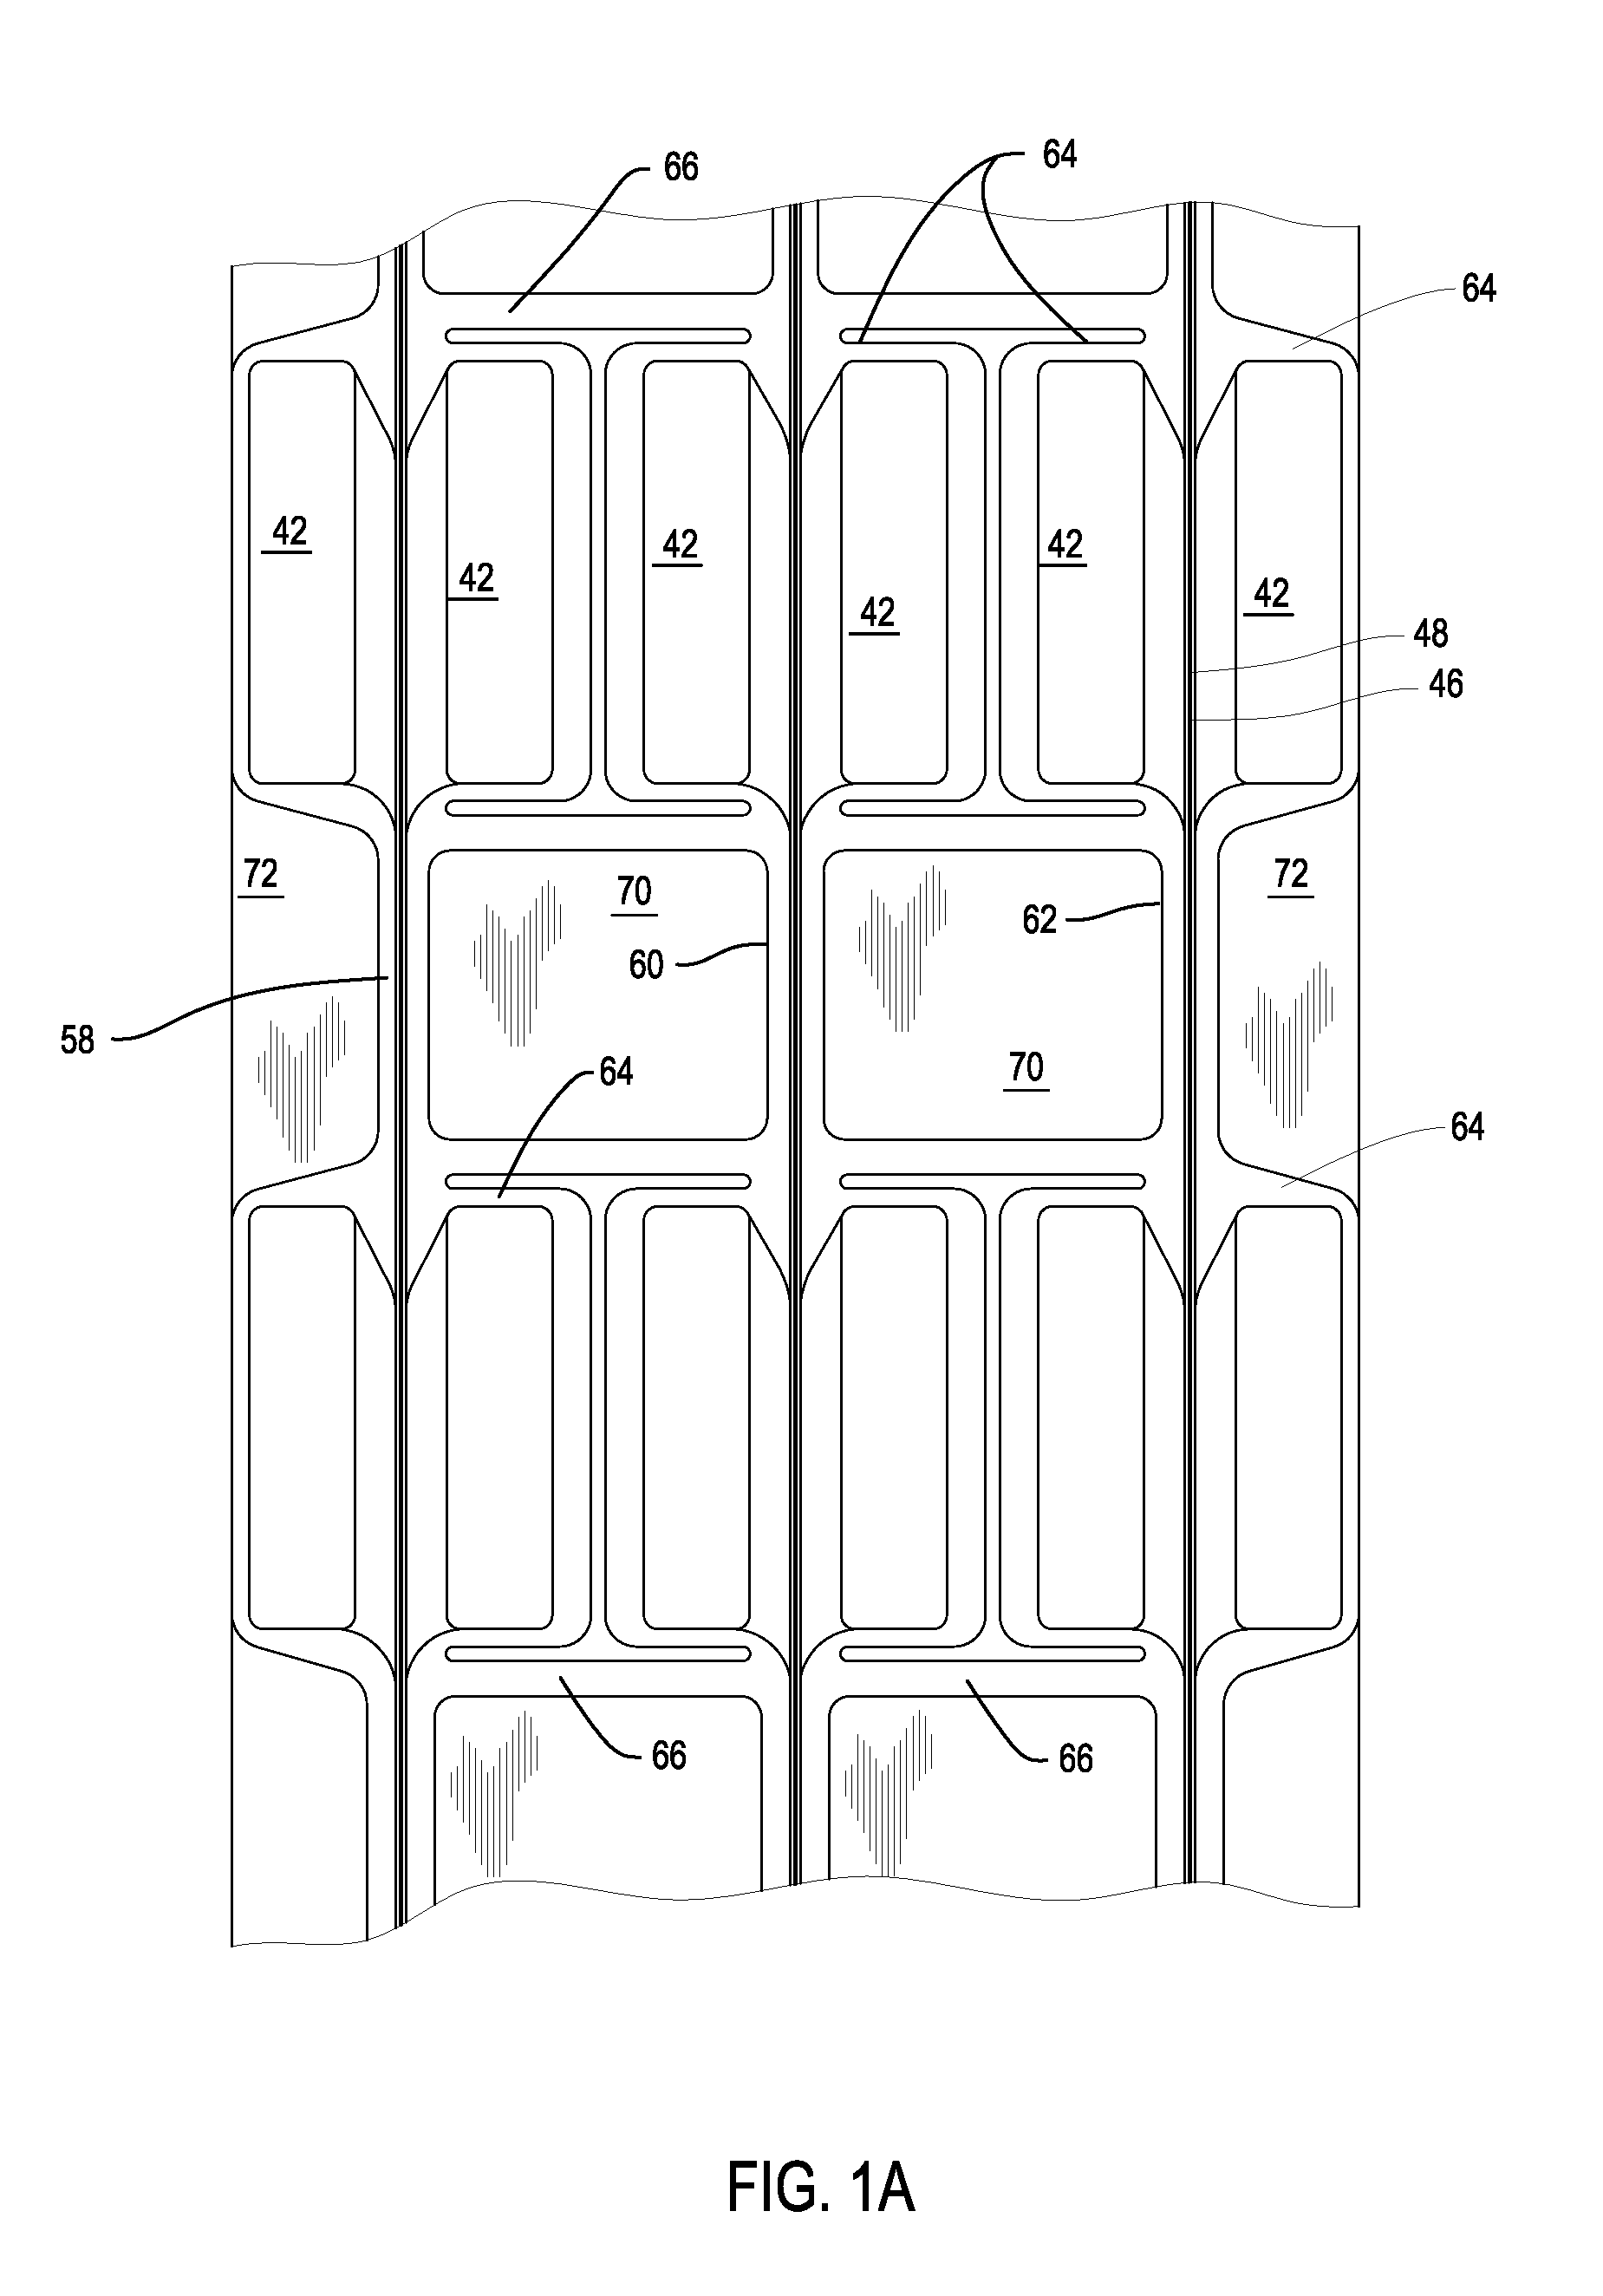 Implantable electrode array assembly including a carrier for supporting the electrodes and control modules for regulating operation of the electrodes embedded in the carrier, and method of making same